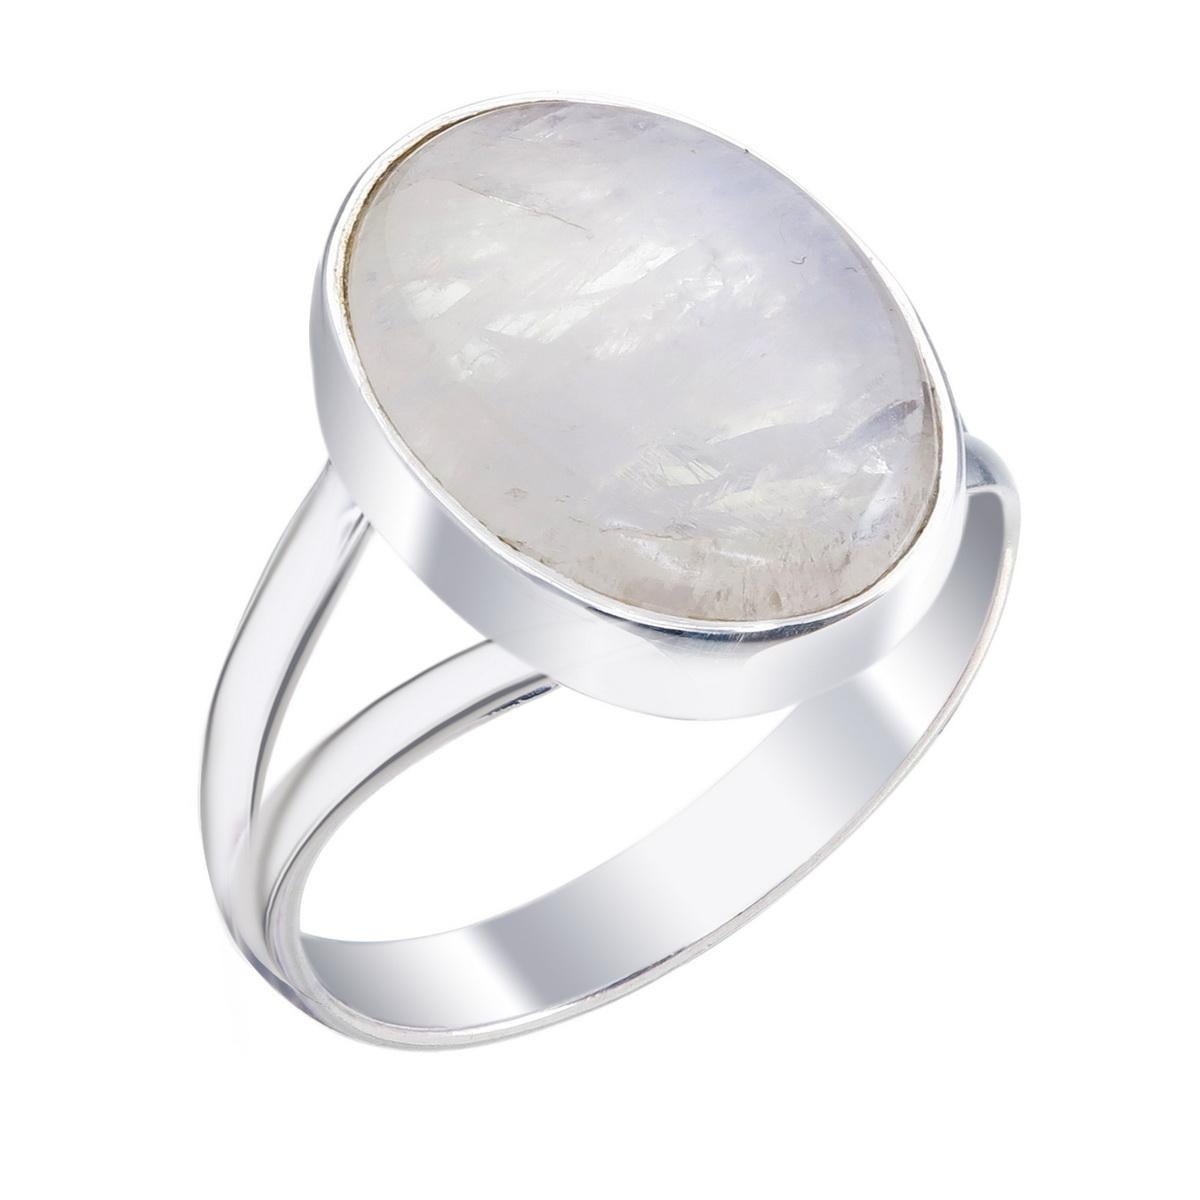 Stunning cabochon Labradorite set in 925 Sterling Silver.
Perfect for any occasion, this ring complements both casual and formal attire, adding a touch of celestial elegance to any outfit.
The bezel-set Moonstone ring embraces the wearer with its